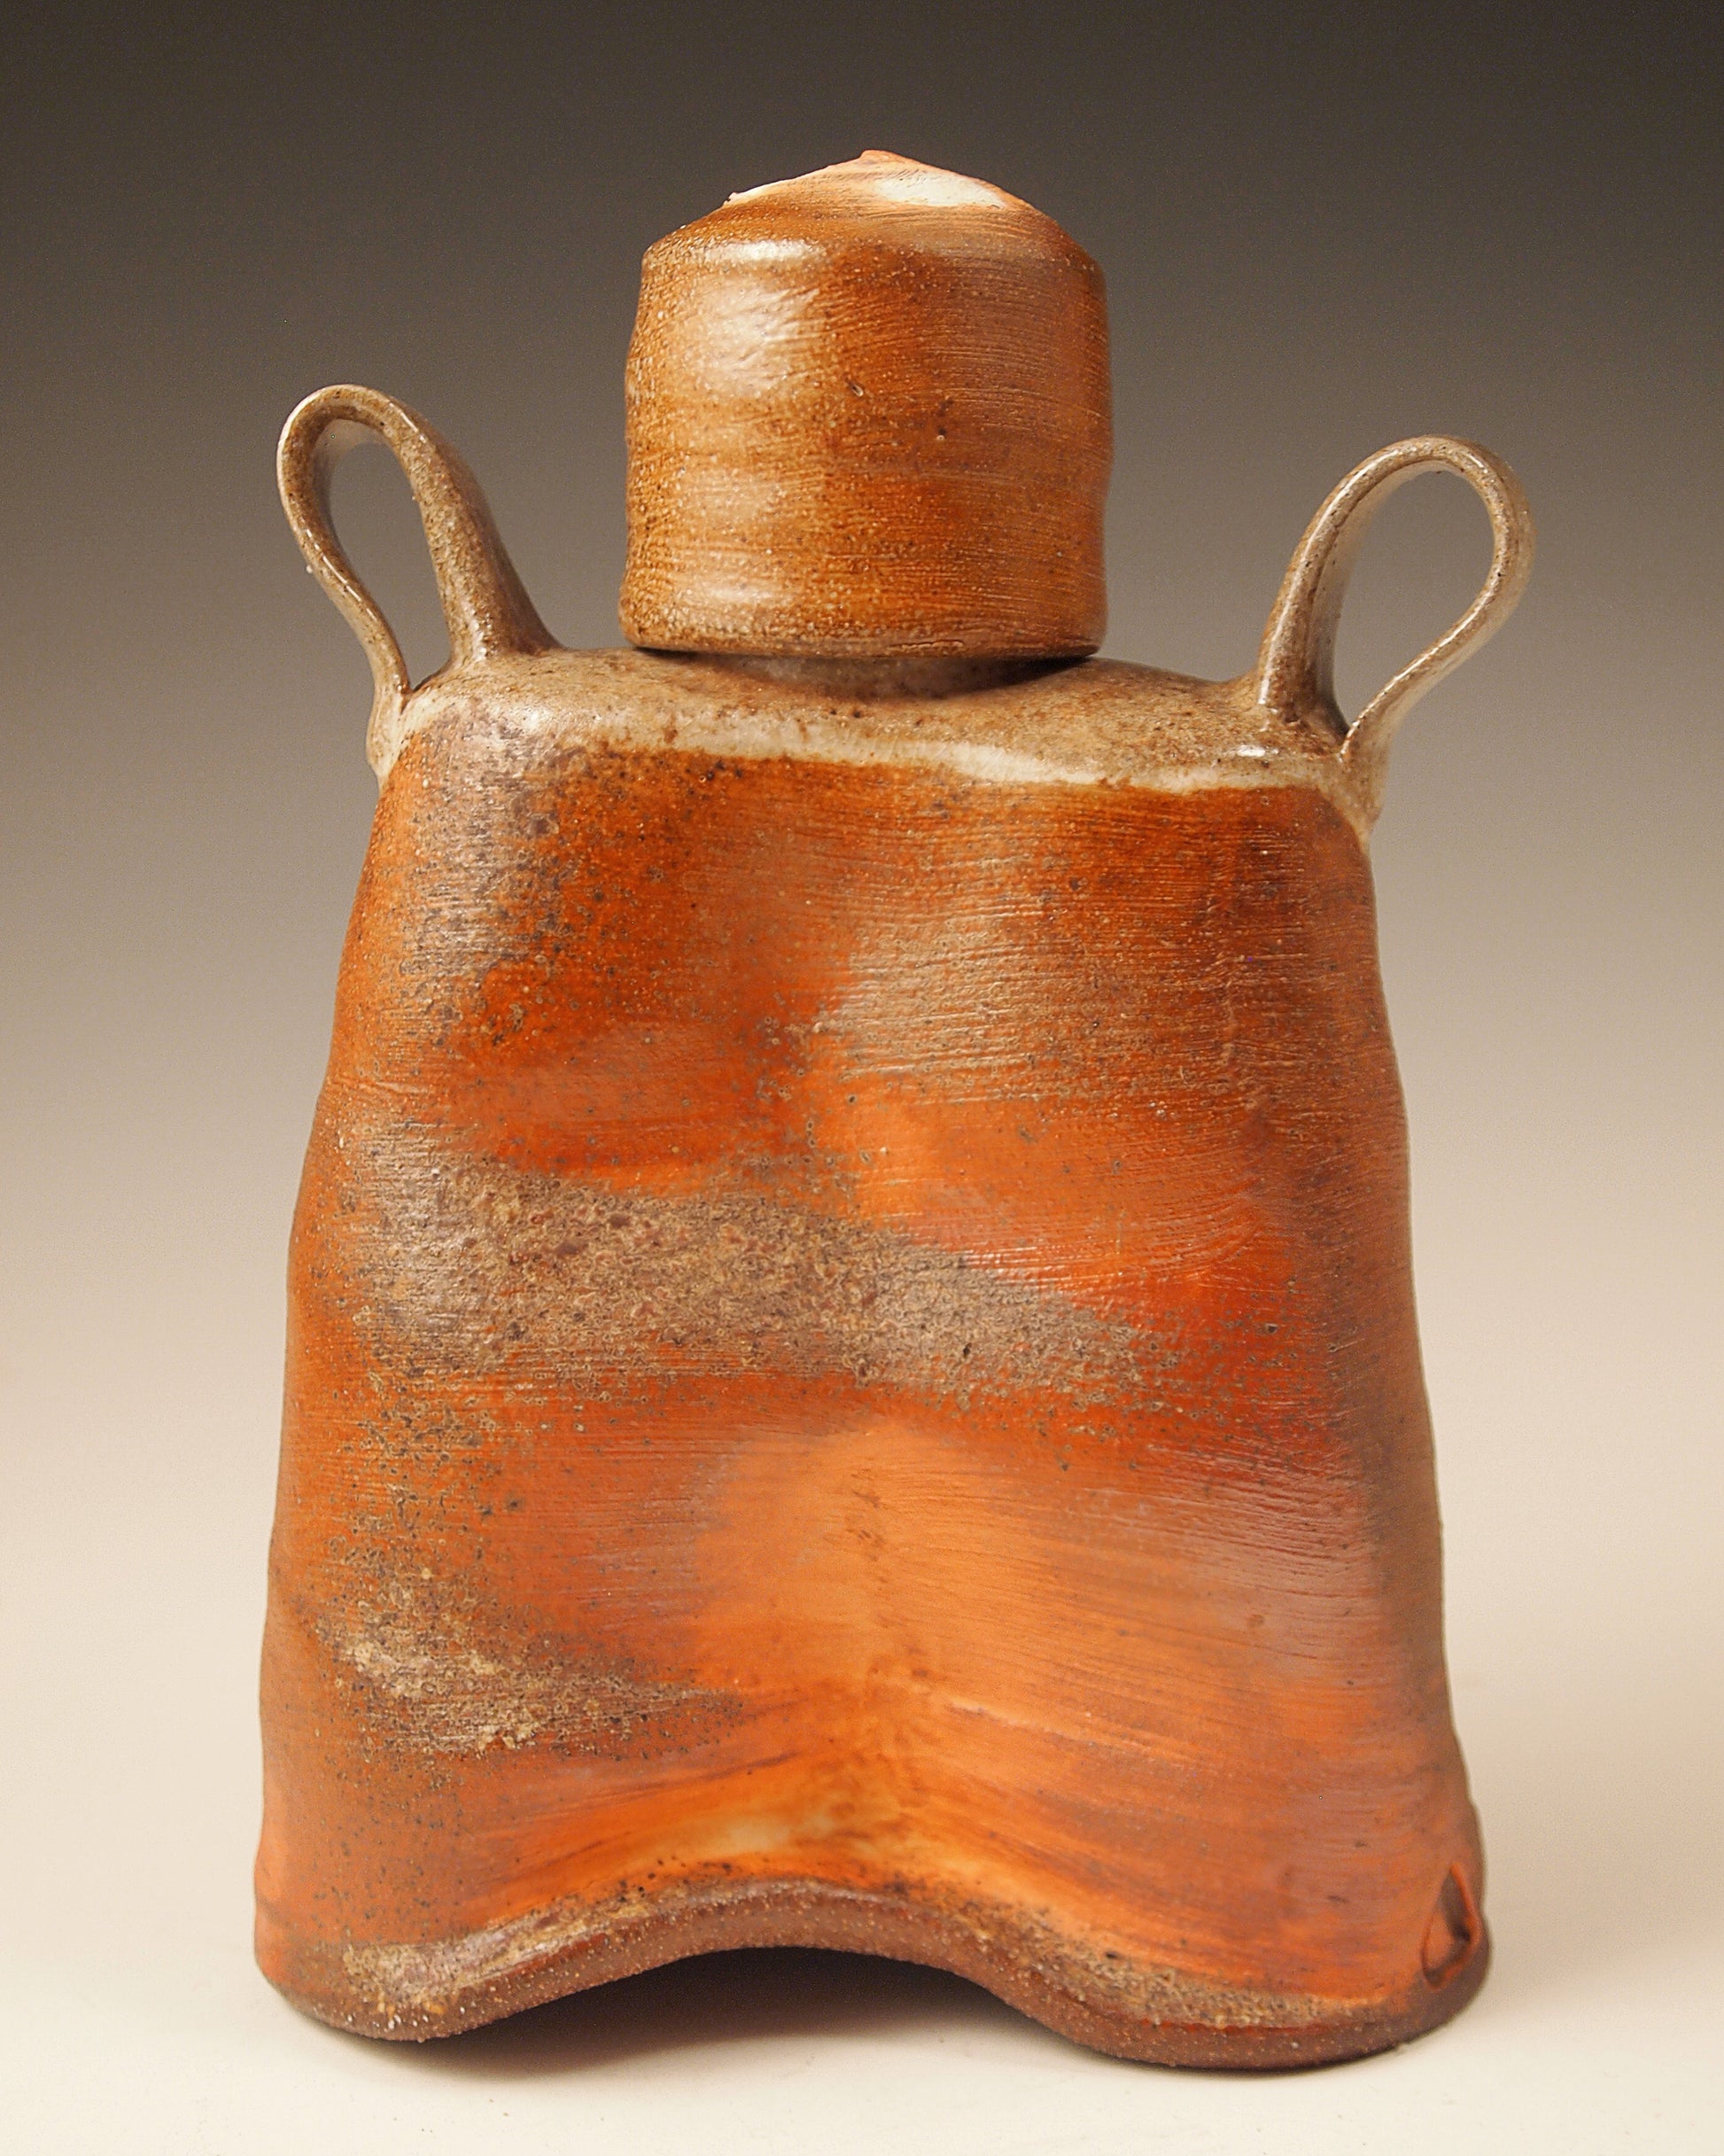 Small, handmade ceramic whiskey flask.  Wood-fired Stoneware.  Bright orange and brown slip exterior.  Rustic design.  Front view.